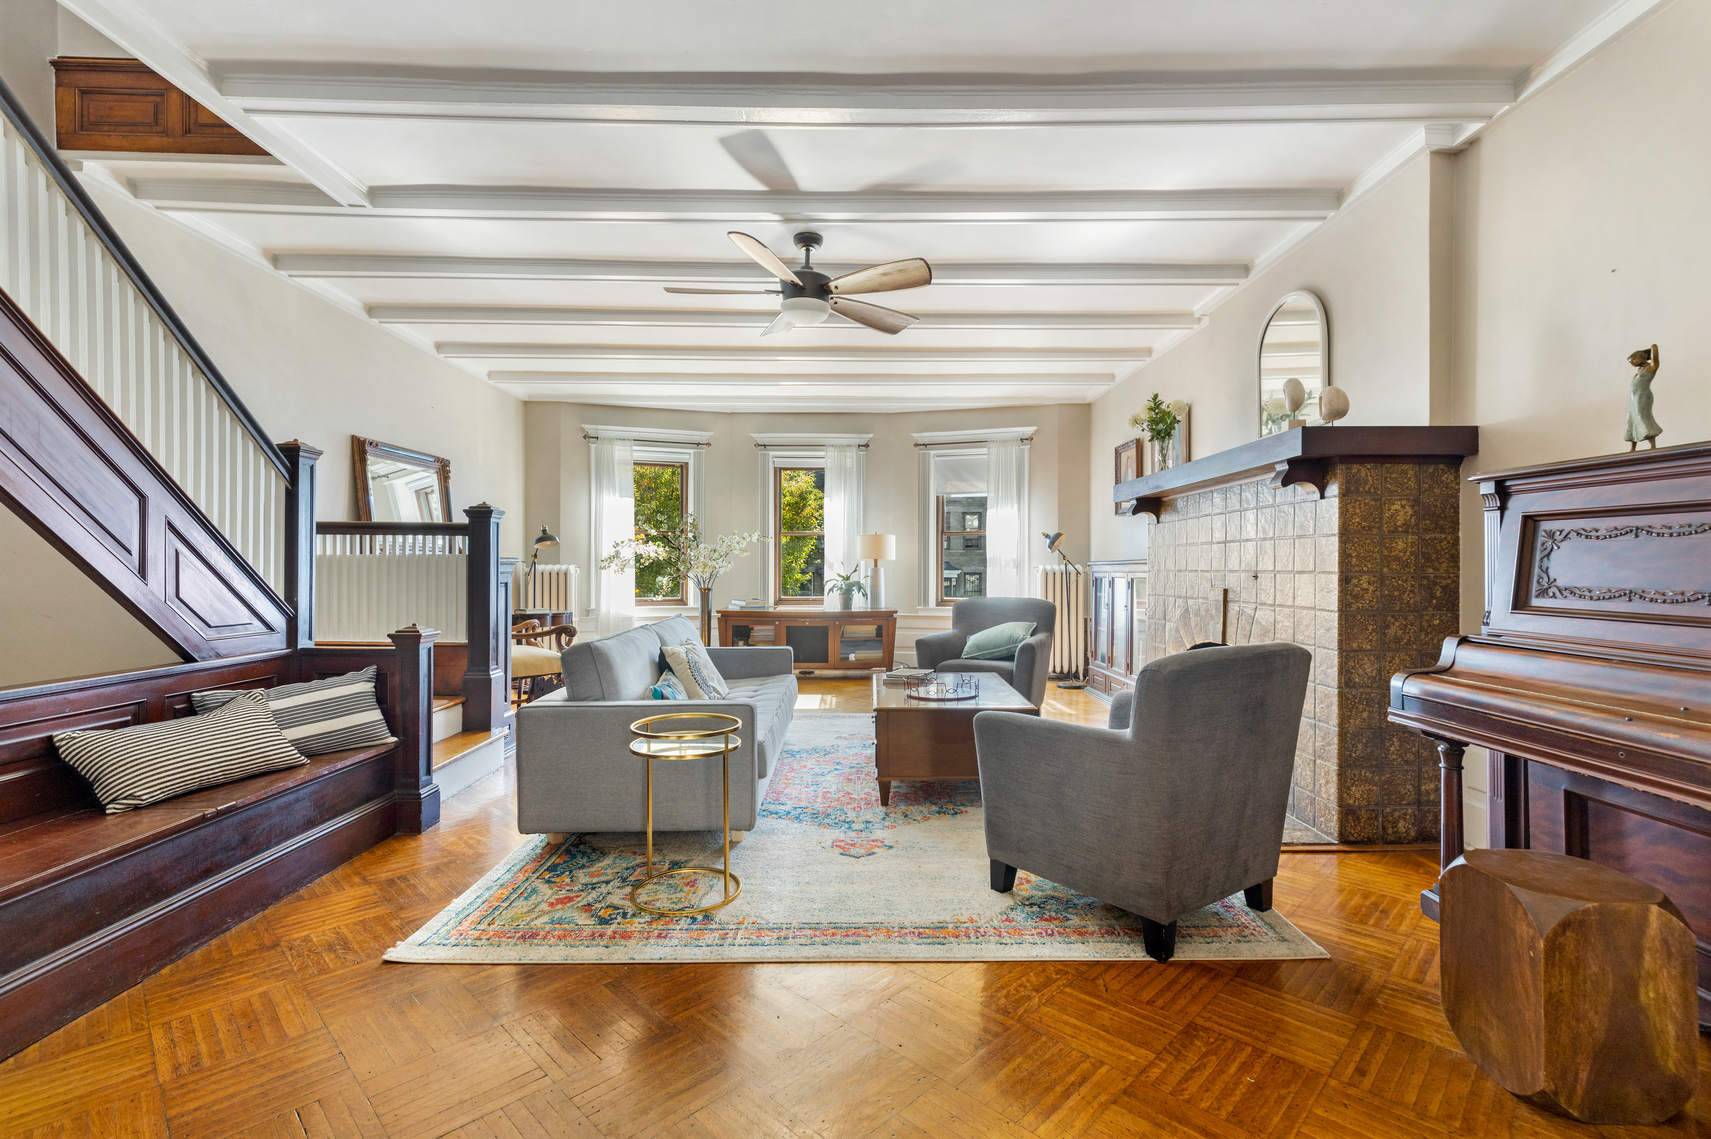 Welcome to 361 Parkside Avenue, a stunning turnkey townhouse built in coveted Doctors Row in Prospect Lefferts Gardens.